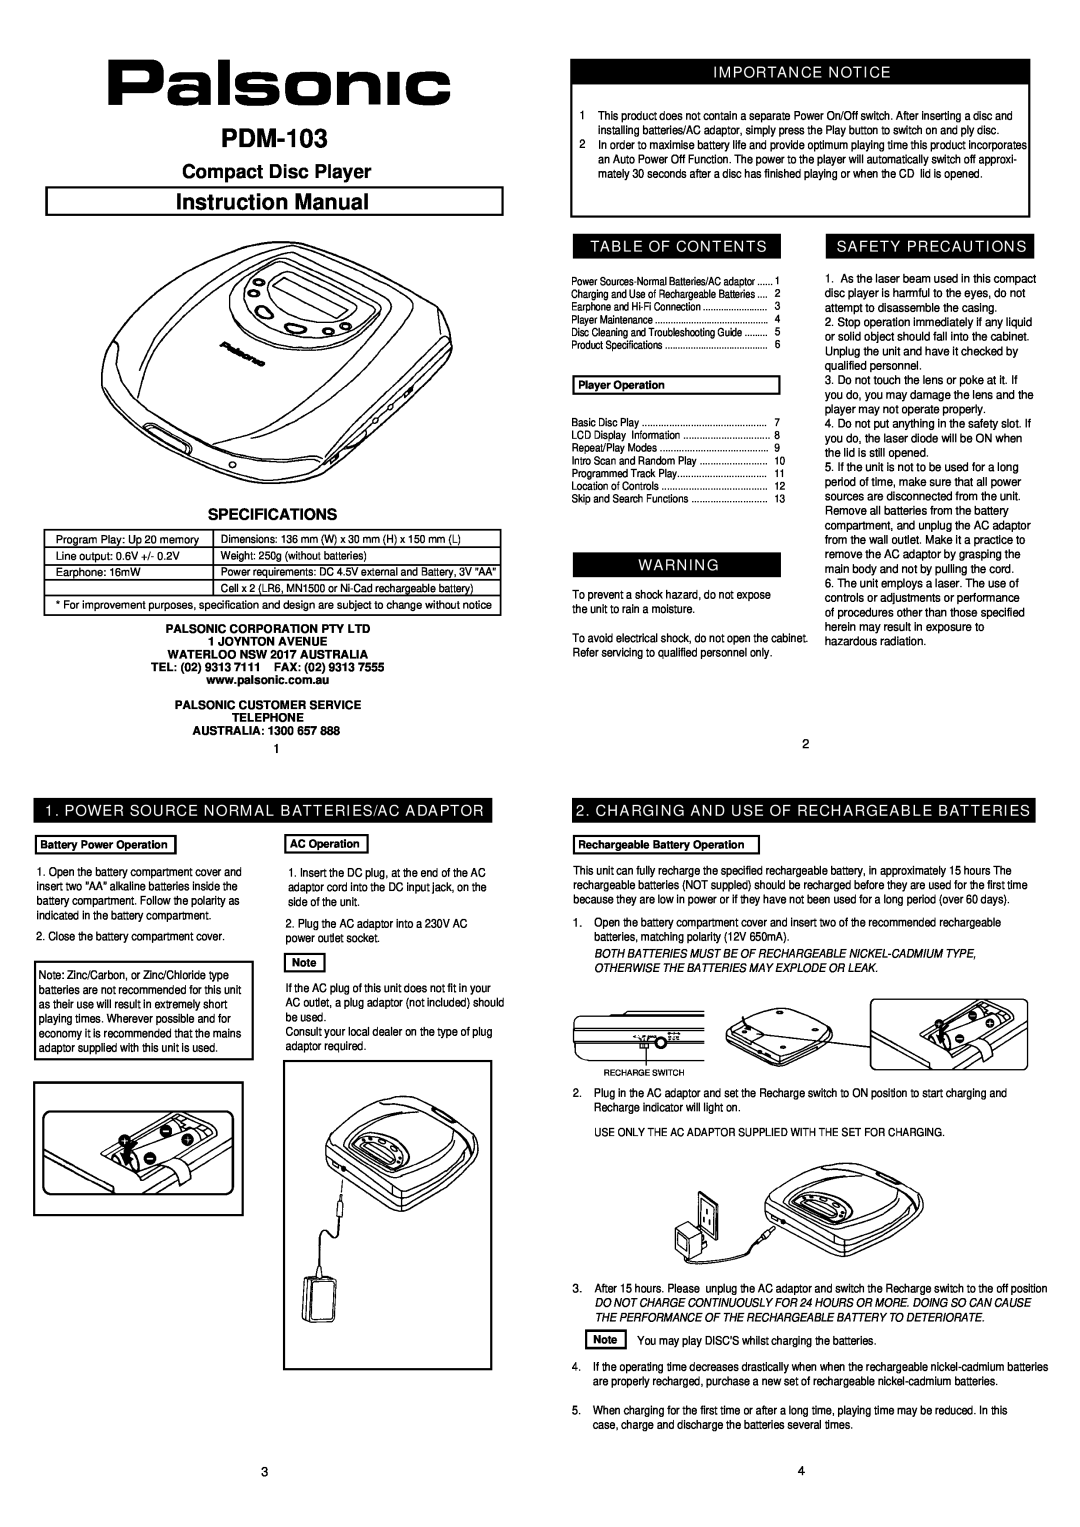 Palsonic PDM-103 instruction manual Importance Notice, Table Of Contents, Specifications, TEL 02 9313 7111 FAX 02 9313 